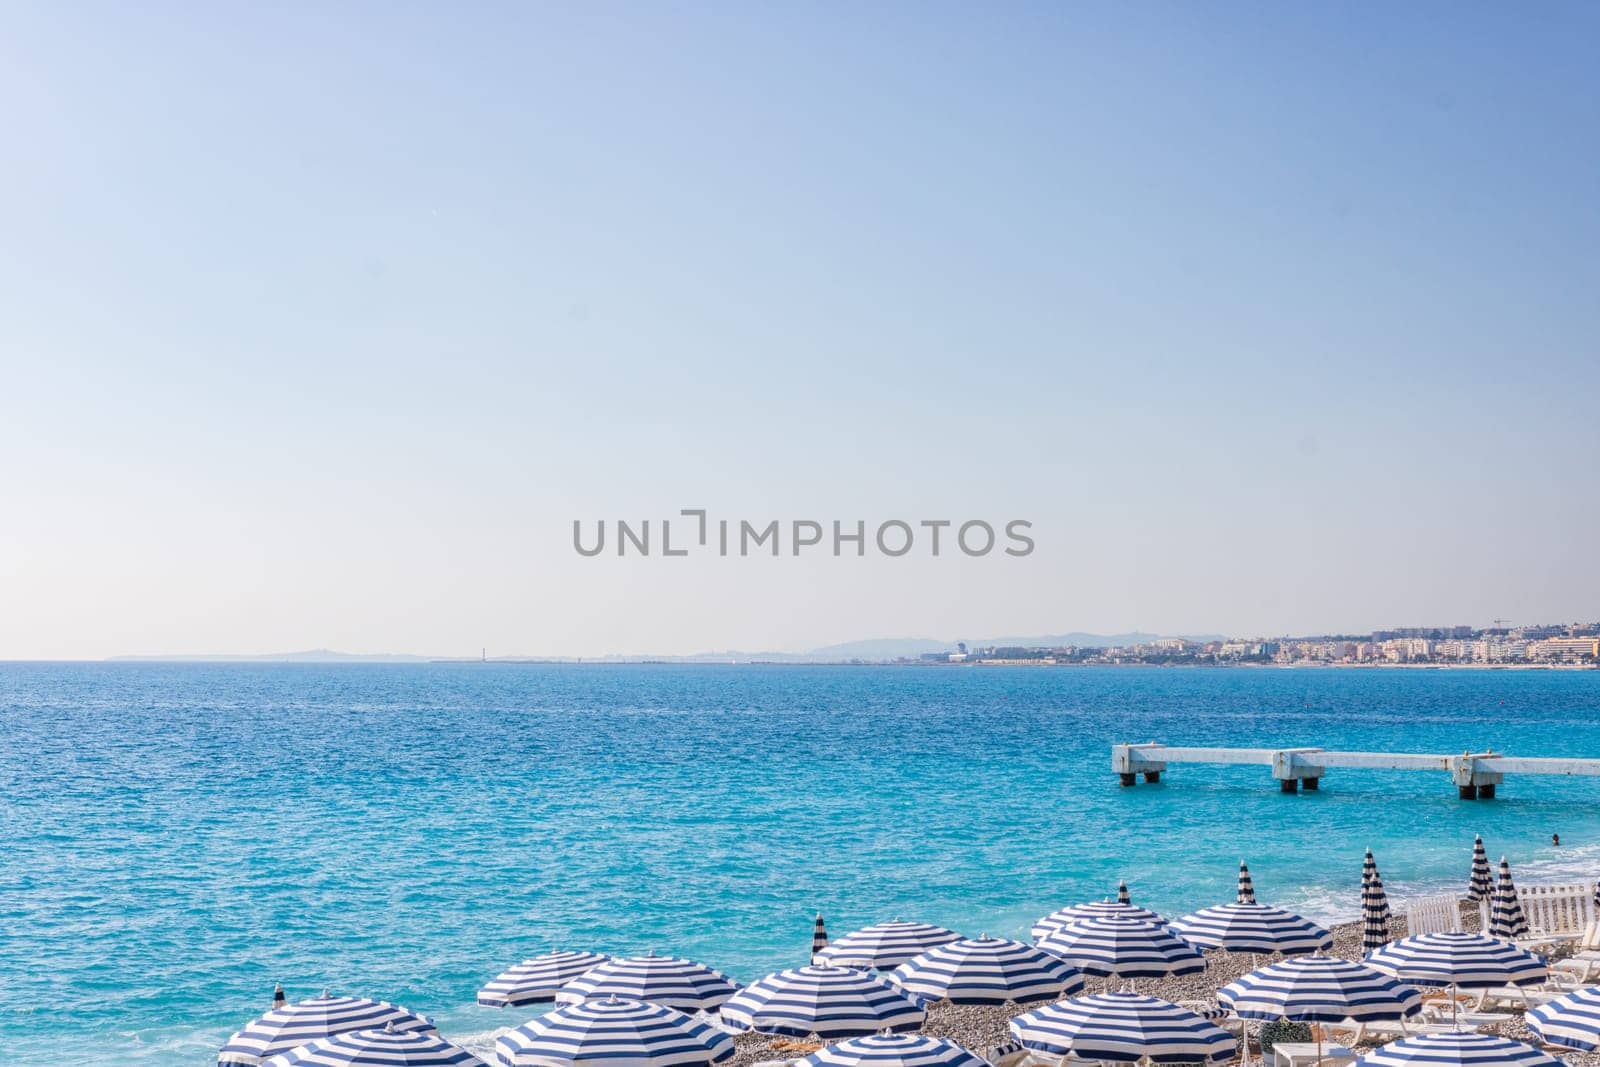 View of the beach in Nice, France, near the Promenade des Anglais